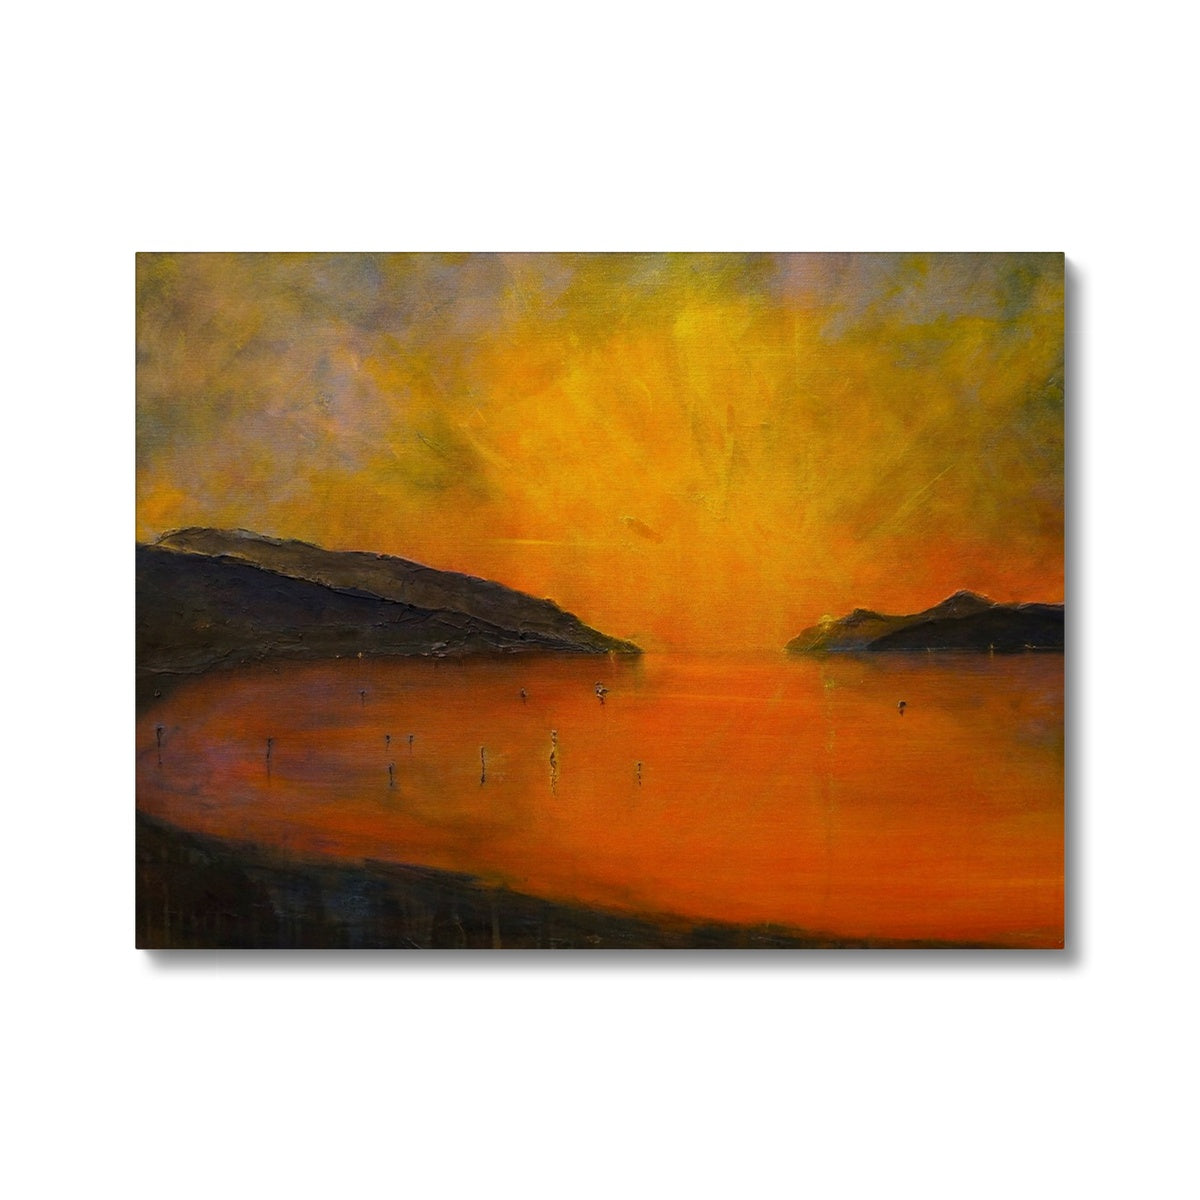 Loch Ness Sunset Painting | Canvas From Scotland-Contemporary Stretched Canvas Prints-Scottish Lochs & Mountains Art Gallery-24"x18"-Paintings, Prints, Homeware, Art Gifts From Scotland By Scottish Artist Kevin Hunter